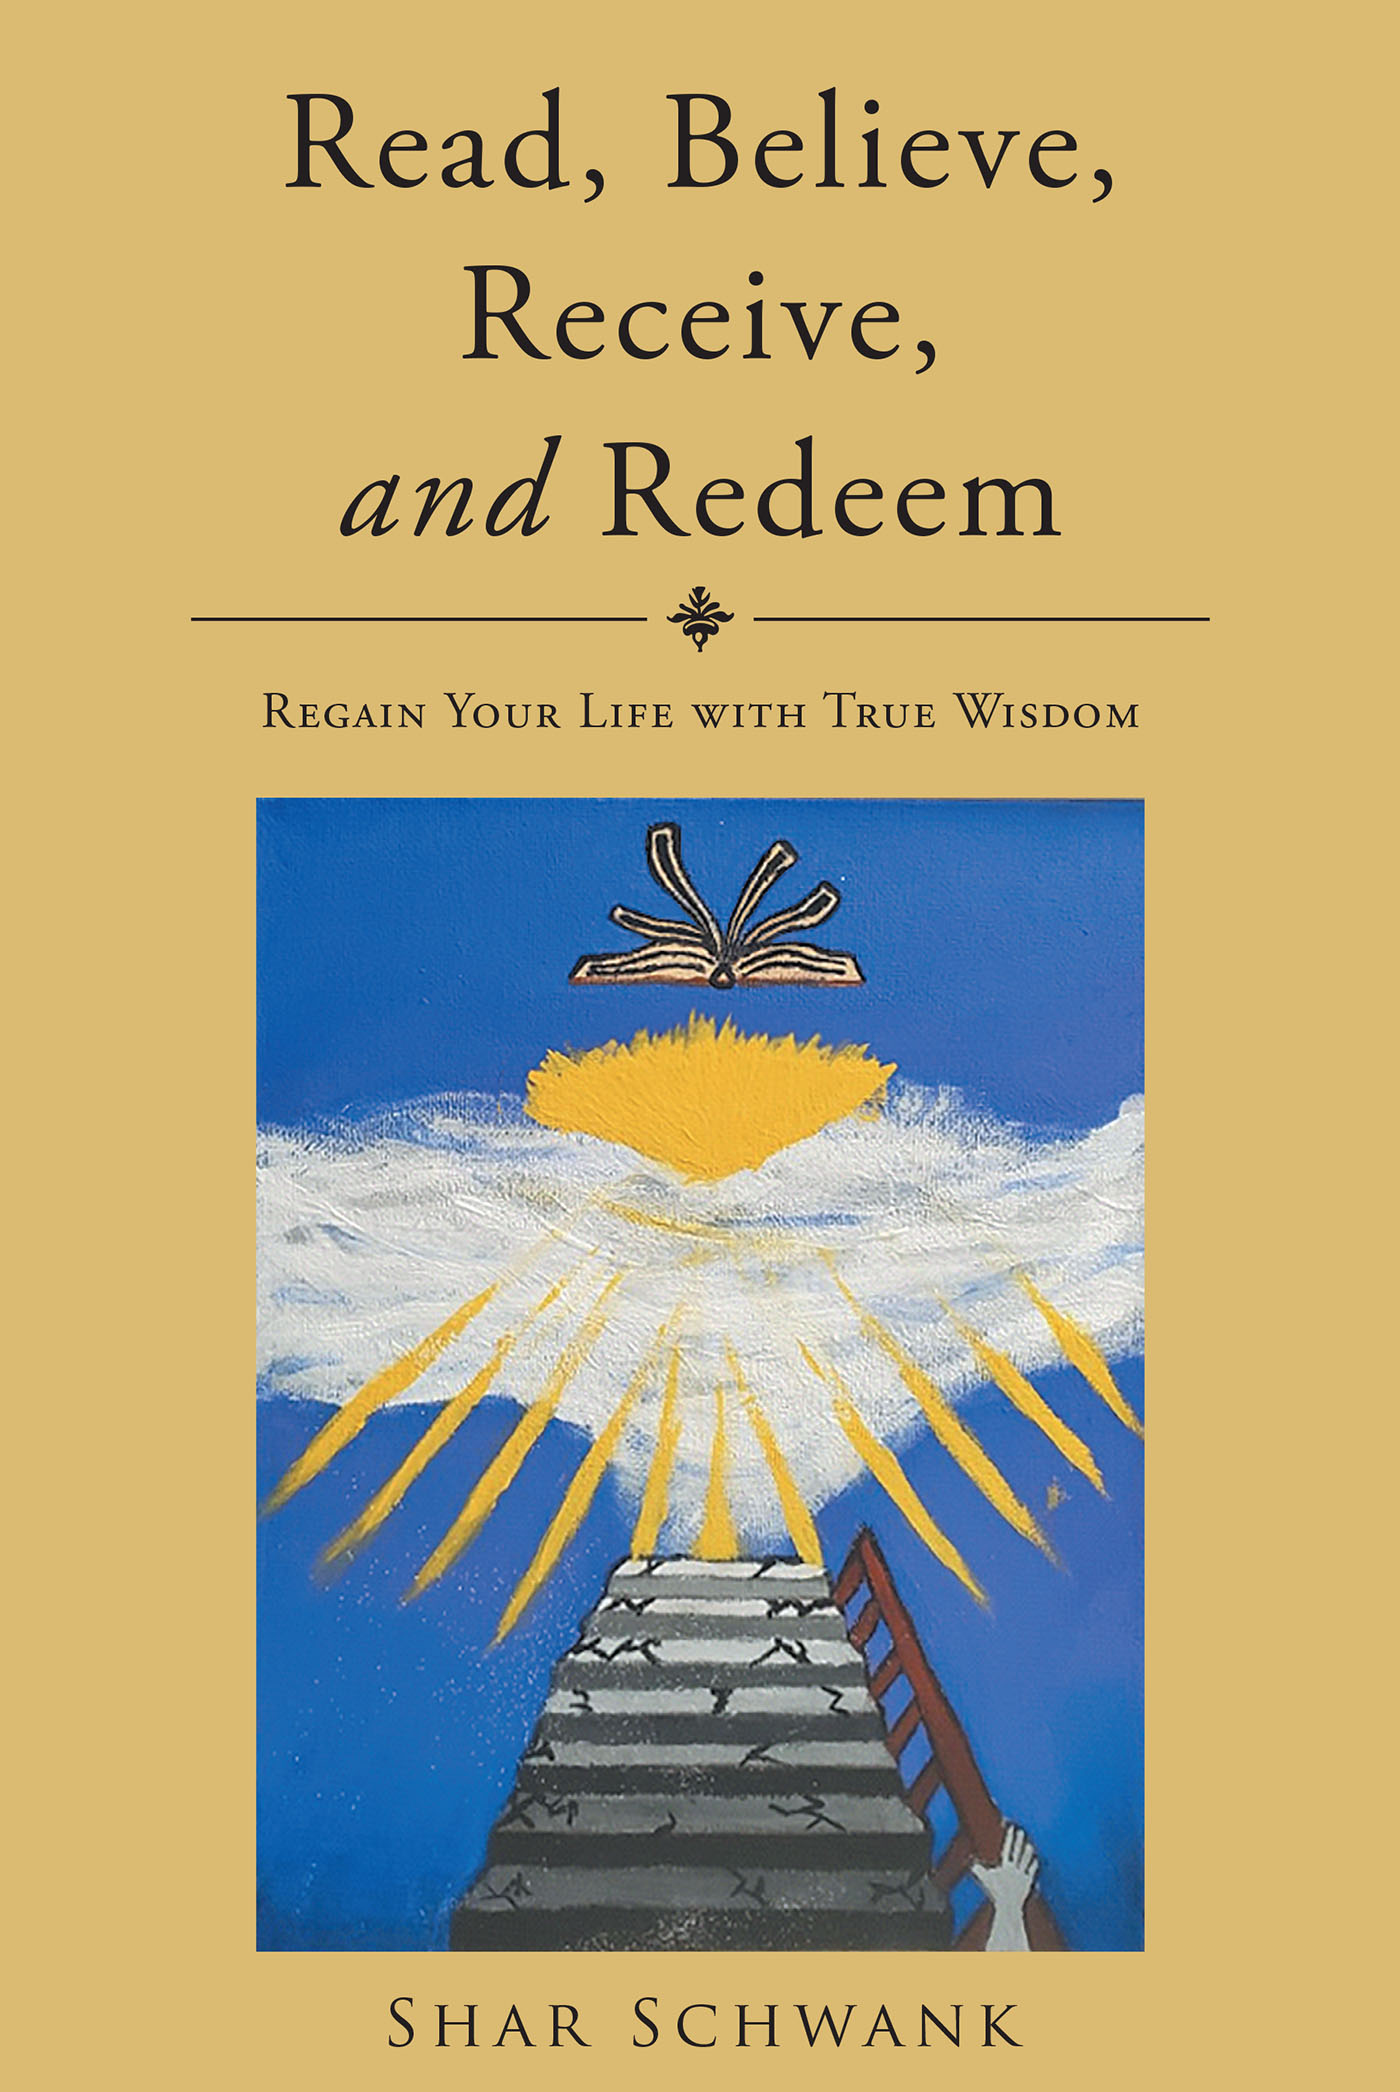 Shar Schwank’s Newly Released "Read, Believe, Receive, and Redeem: Regain Your Life with True Wisdom" is an Empowering Resource for Spiritual Rebirth